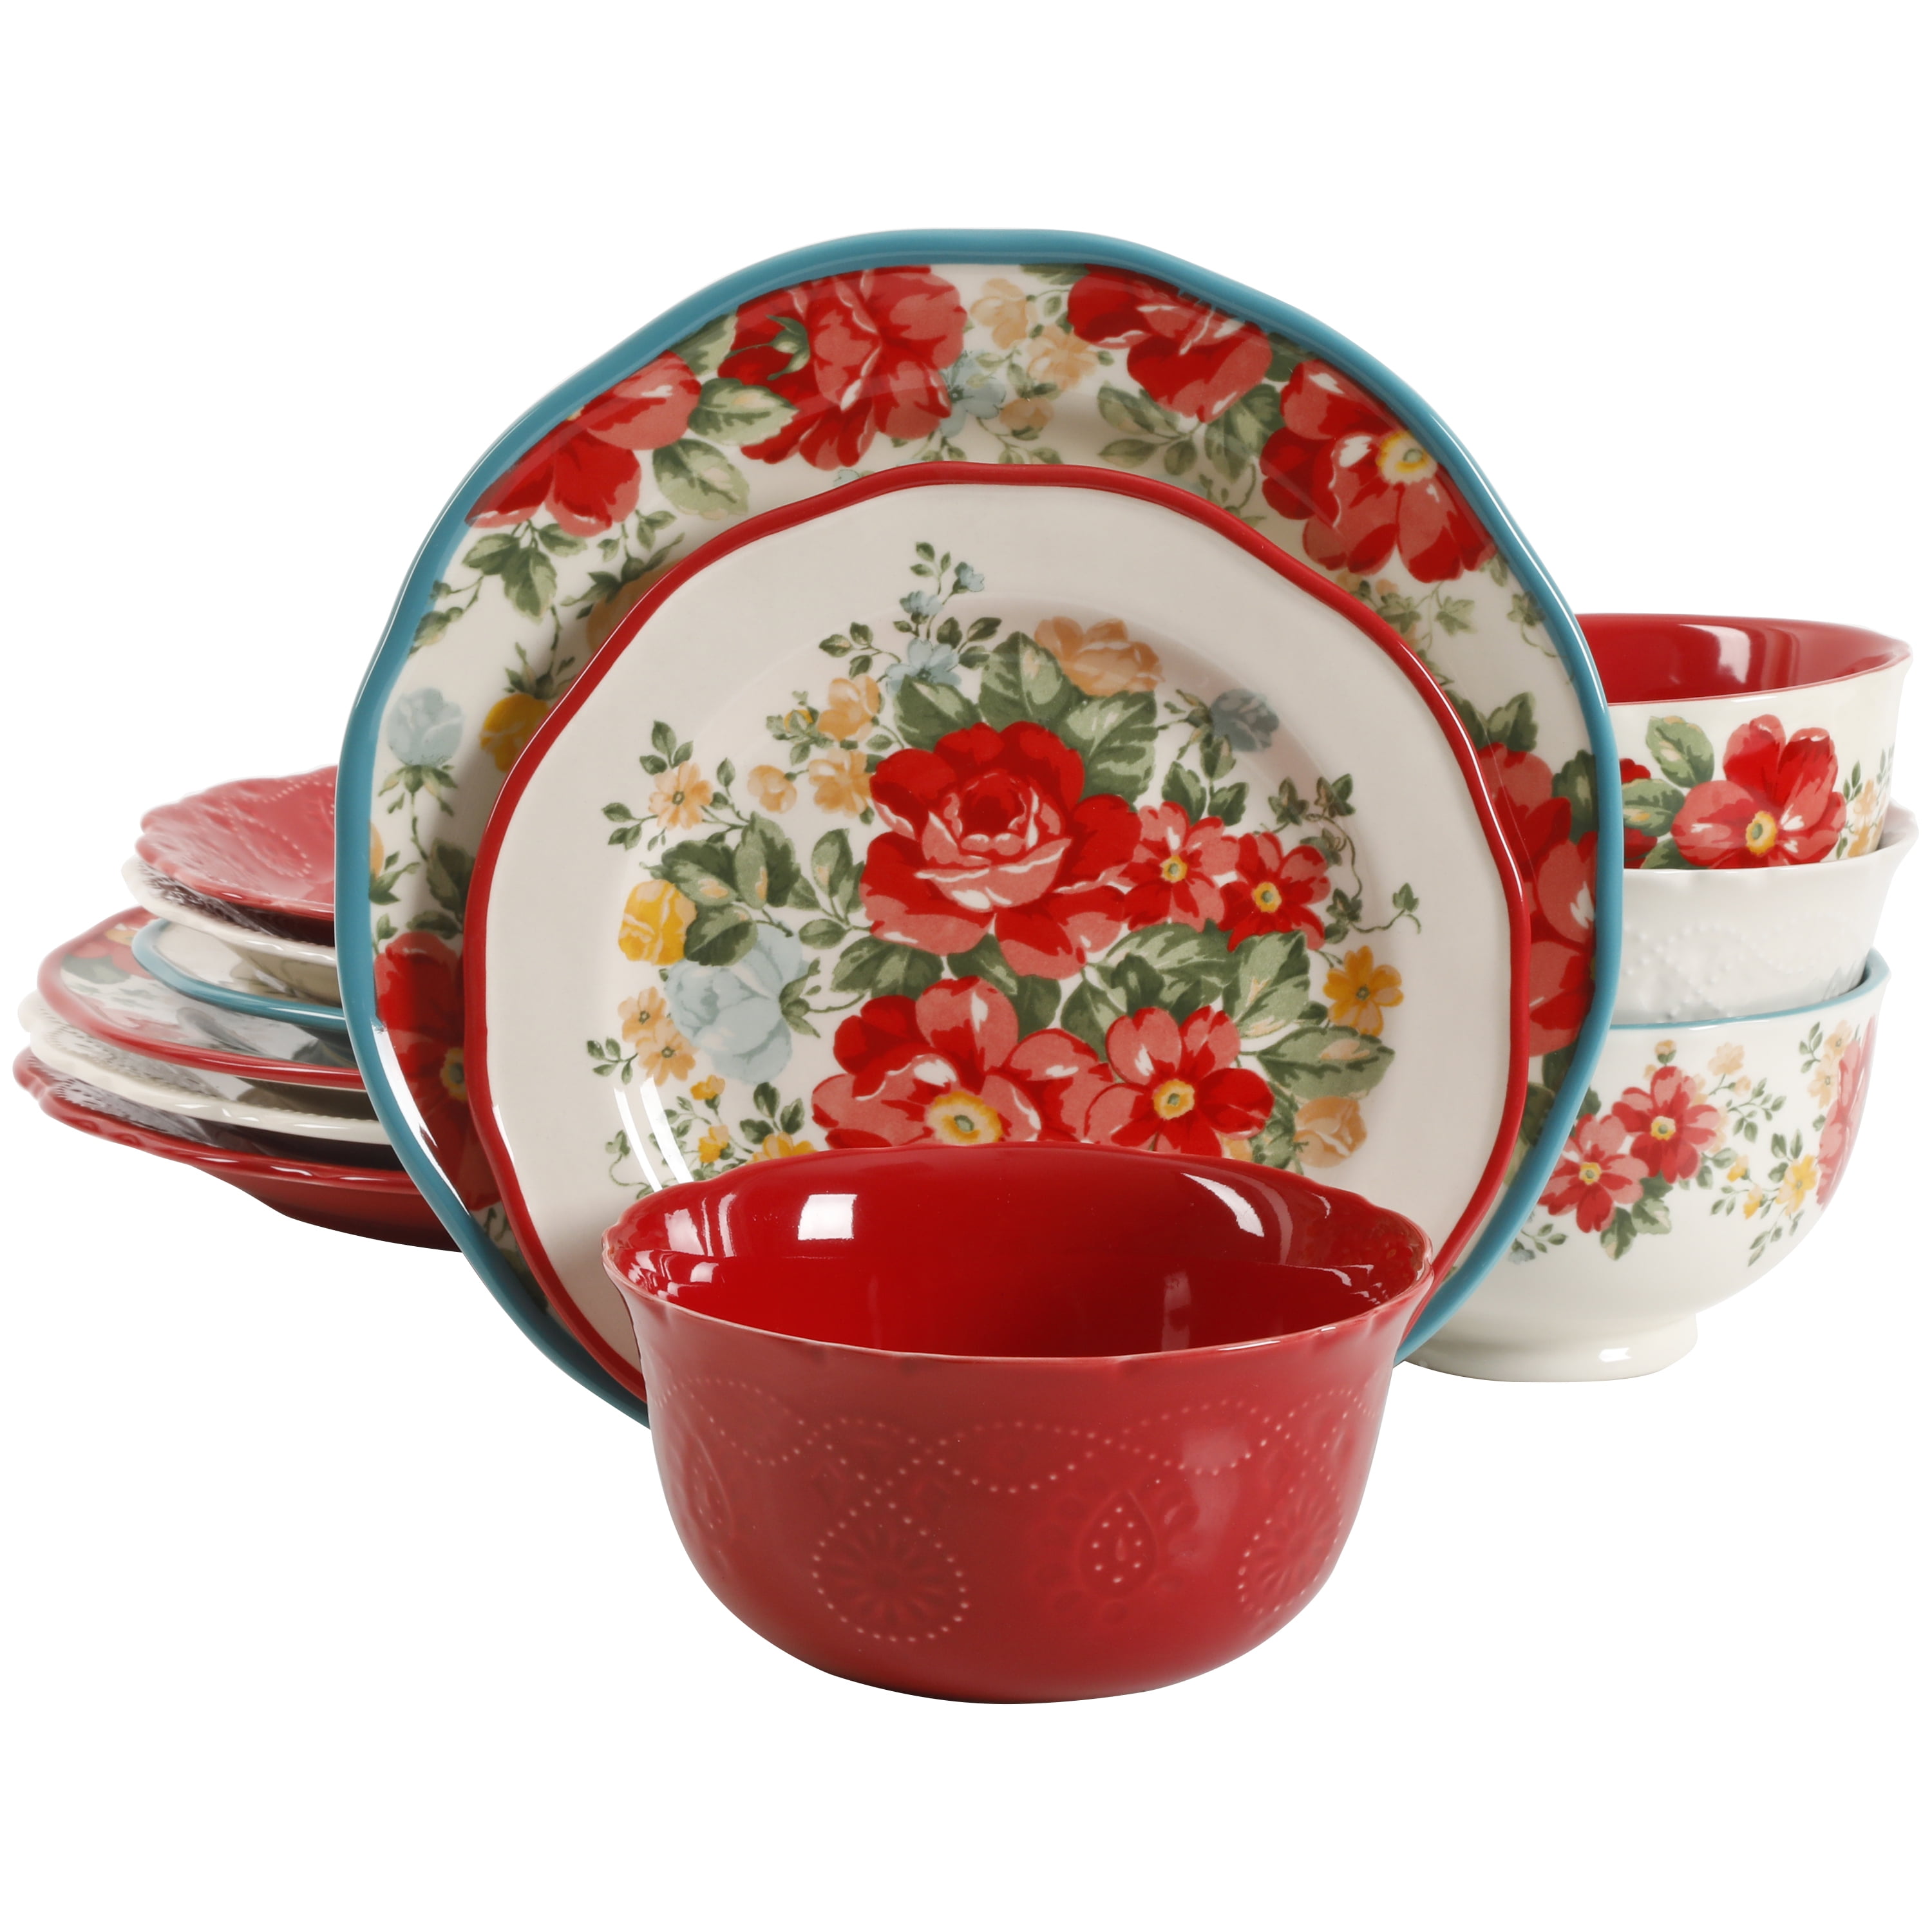 The Pioneer Woman Celia Teal 8.75-Inch Salad Plates Floral Patterns Set of 4